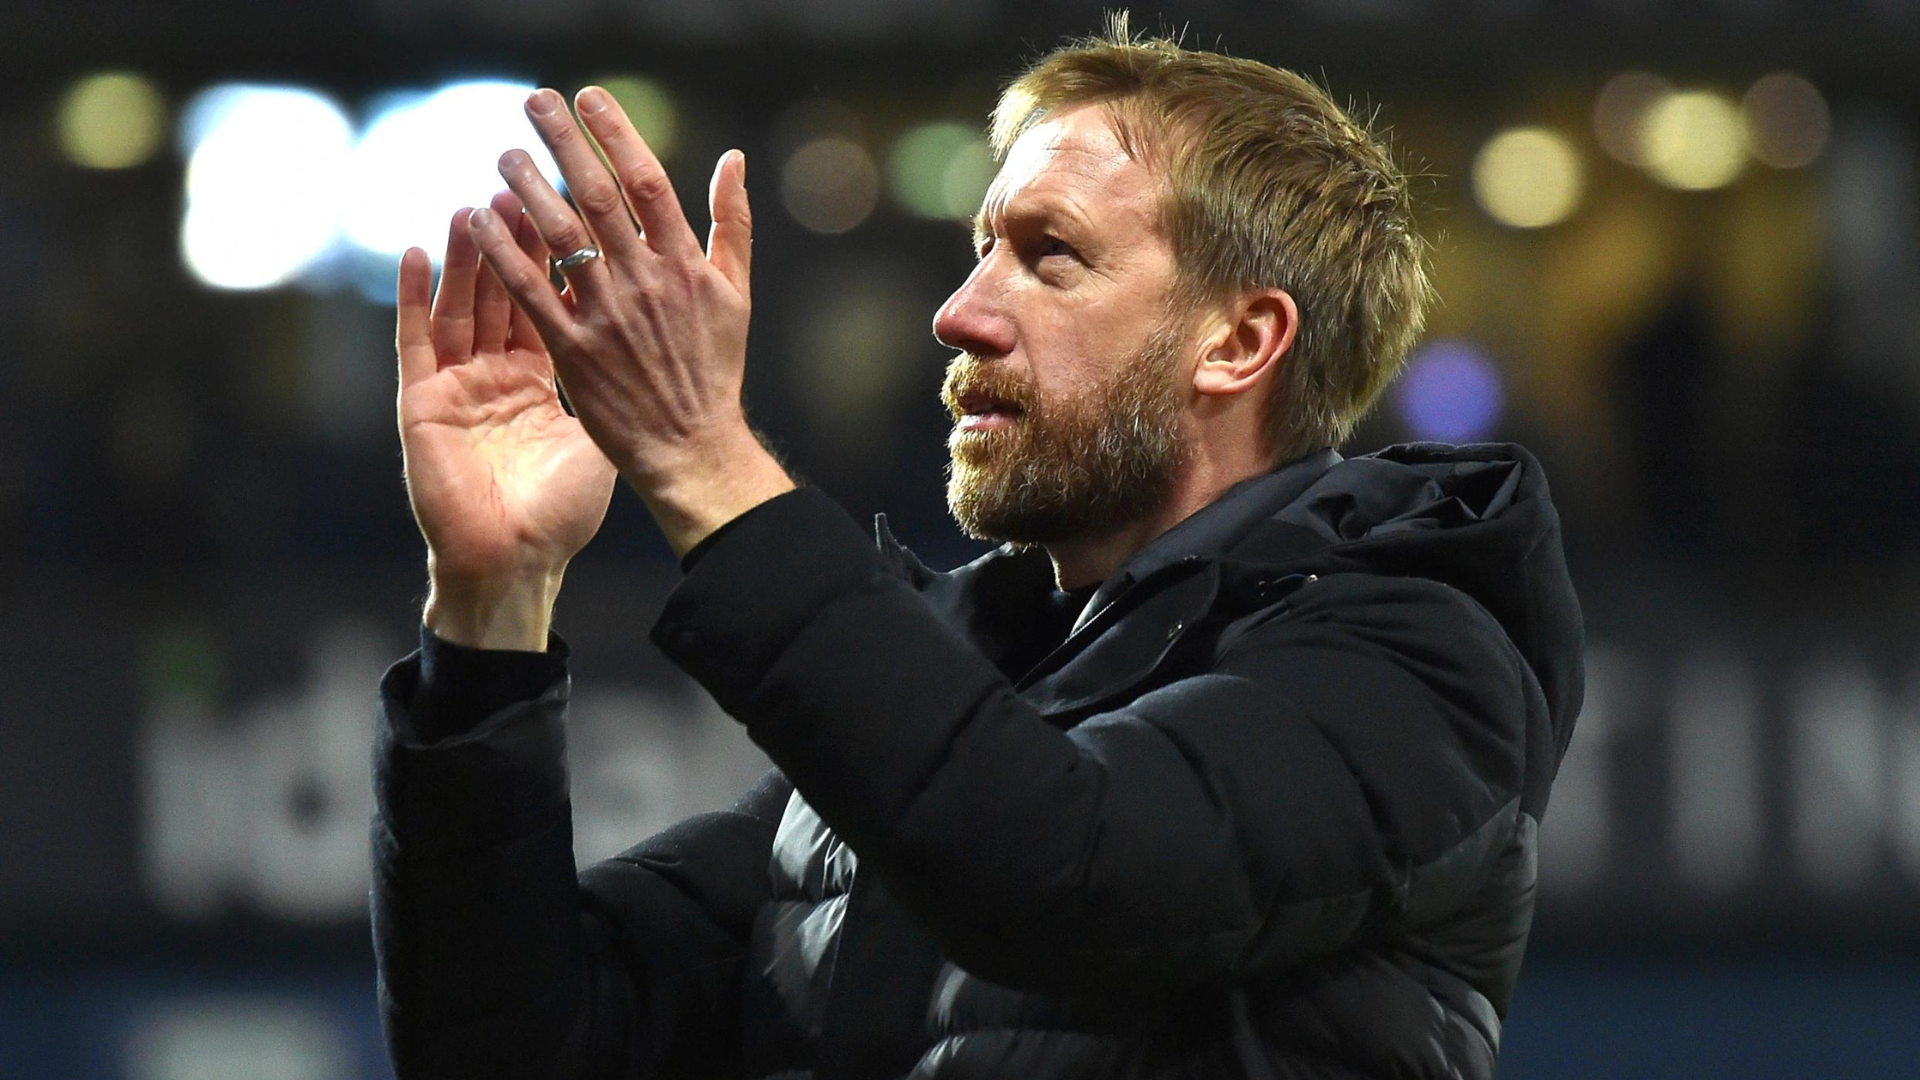 Graham Potter wearing black jacket  and clapping his hands